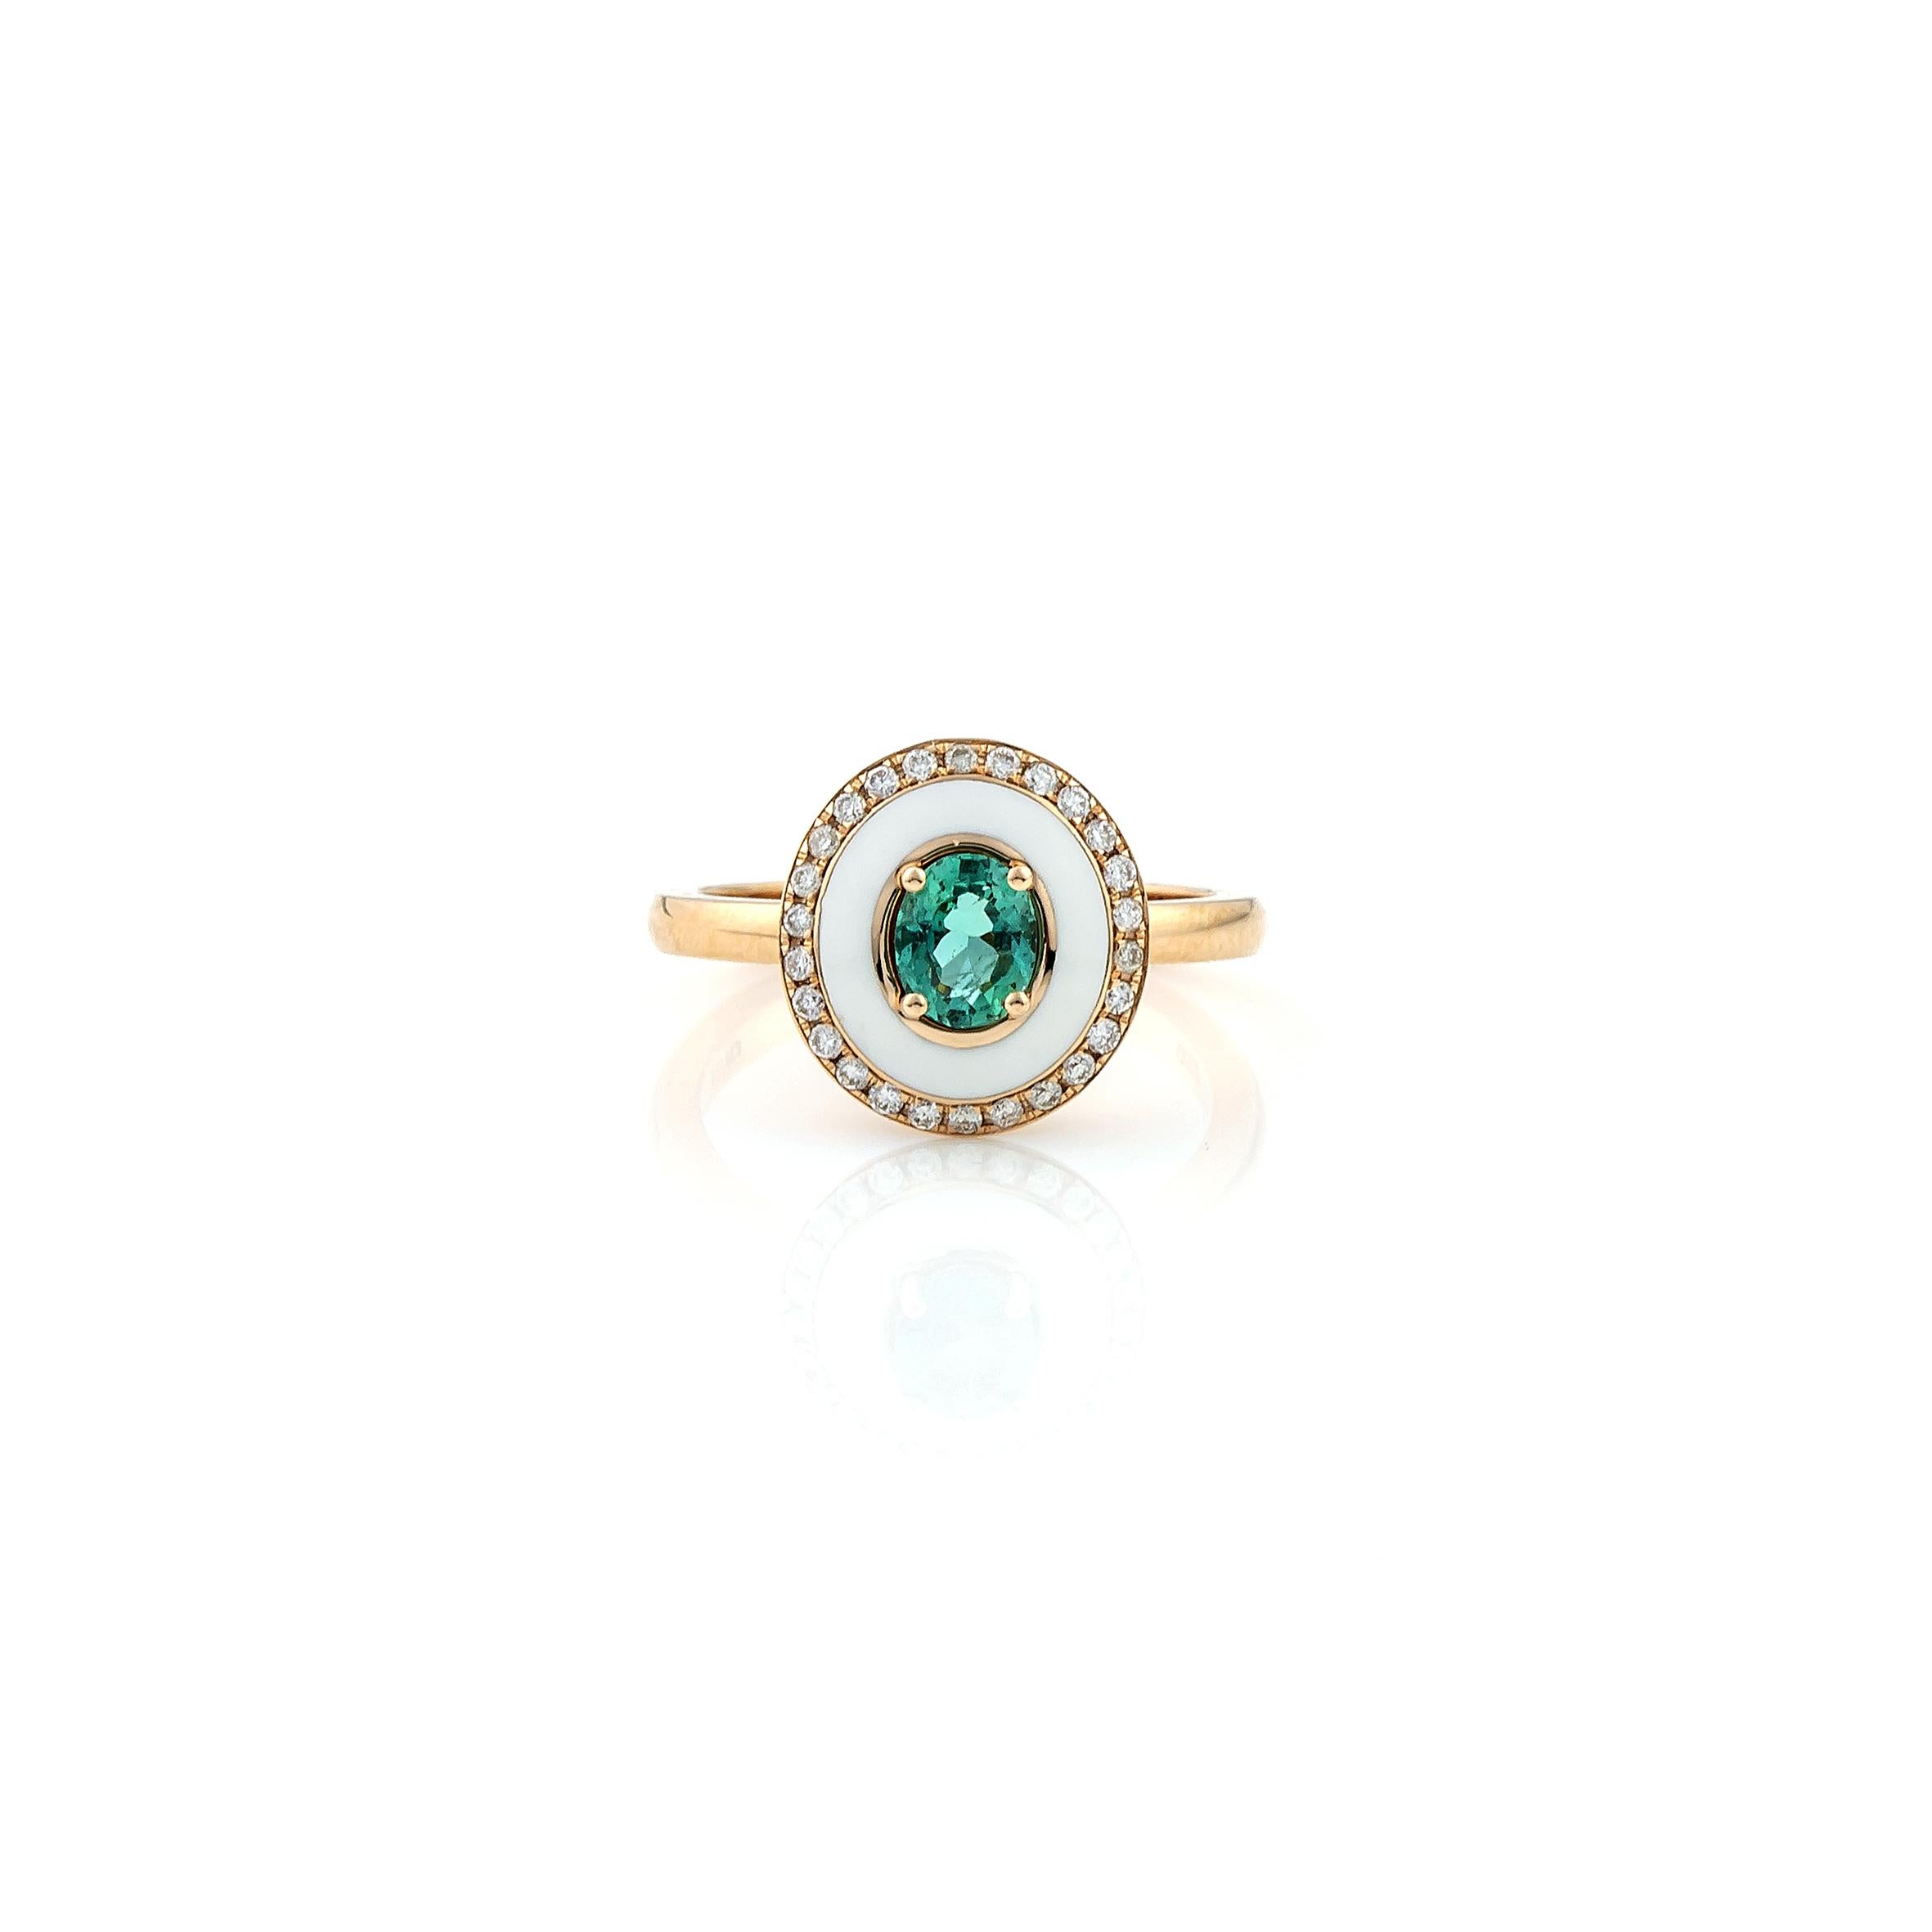 White Enamel Cocktail Ring, with Oval cut Emerald Center surrounded by brilliant cut pave Diamonds, in 18kt Rose Gold. Unique Cocktail Ring with green emerald stone, set among four prongs handcrafted in 18Kt gold. The white enameling  makes the